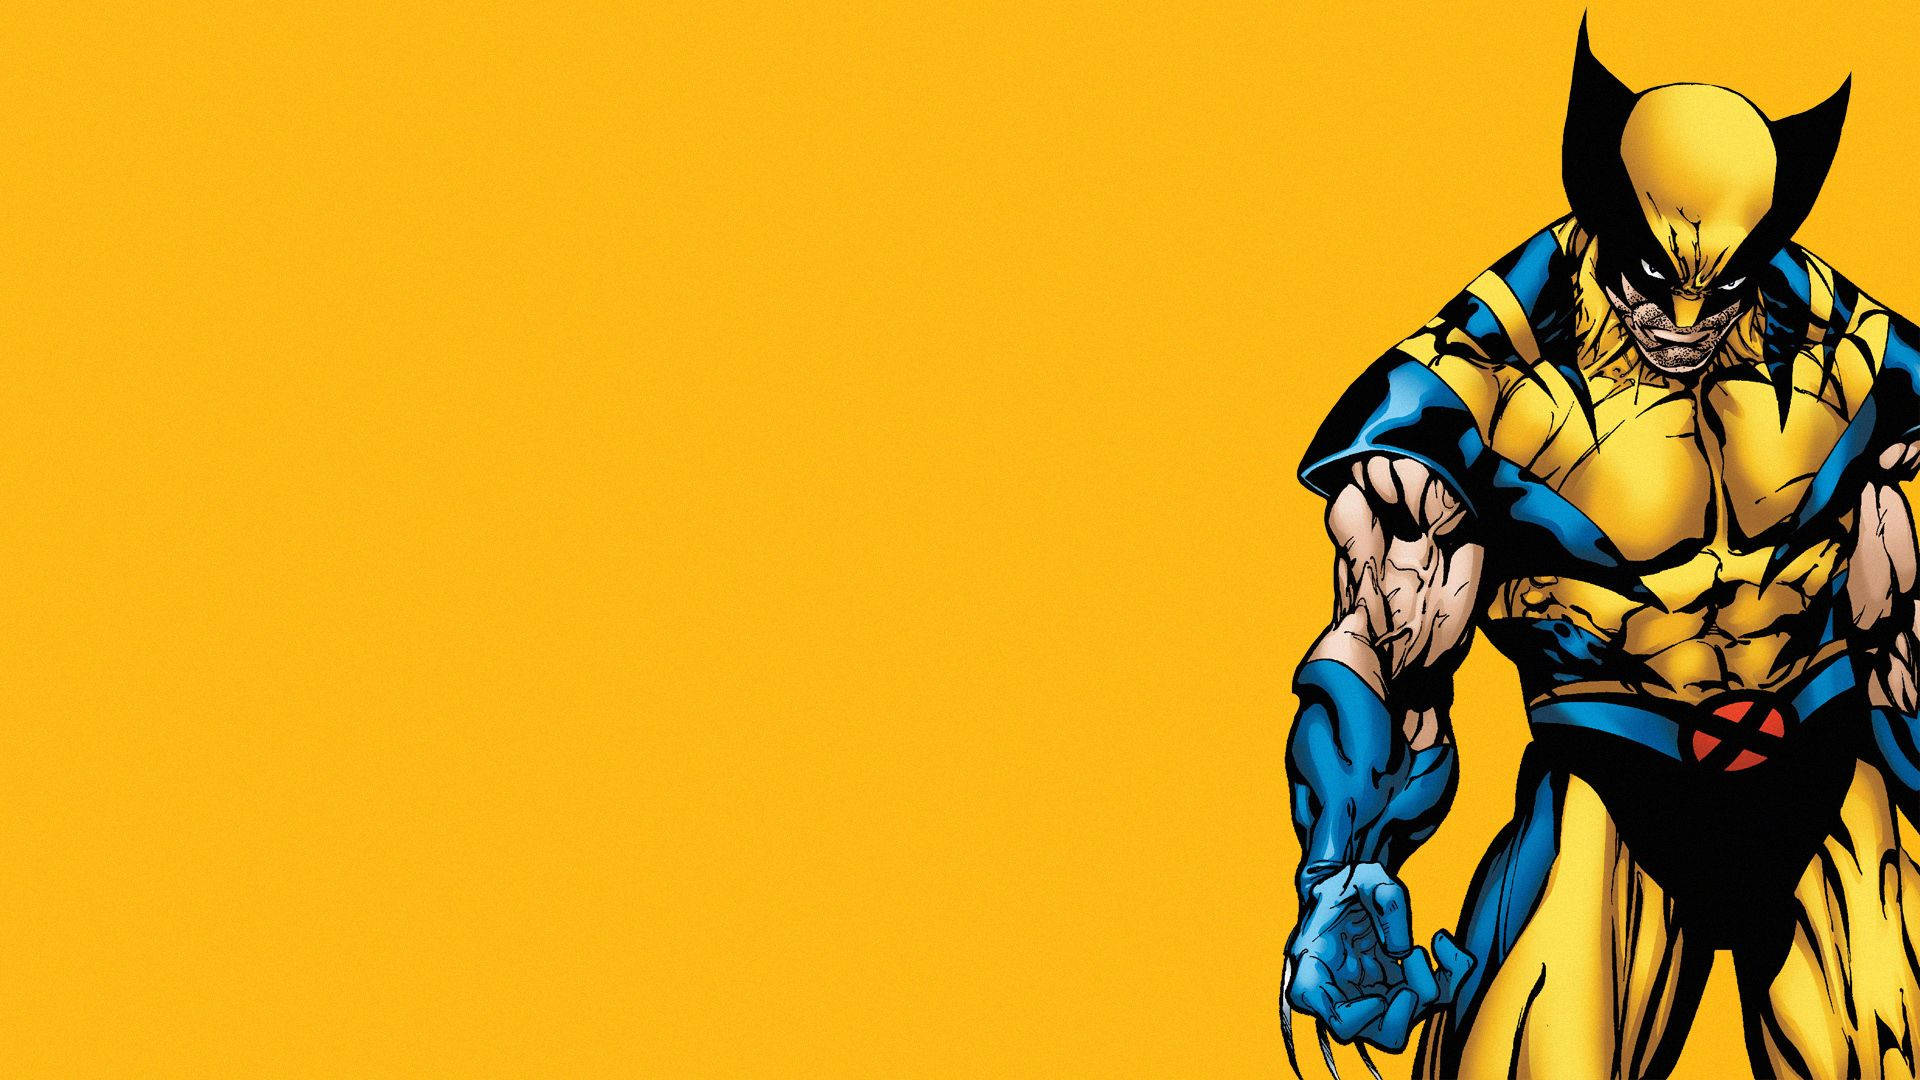 Cartoon Wolverine sporting his classic yellow and black outfit Wallpaper